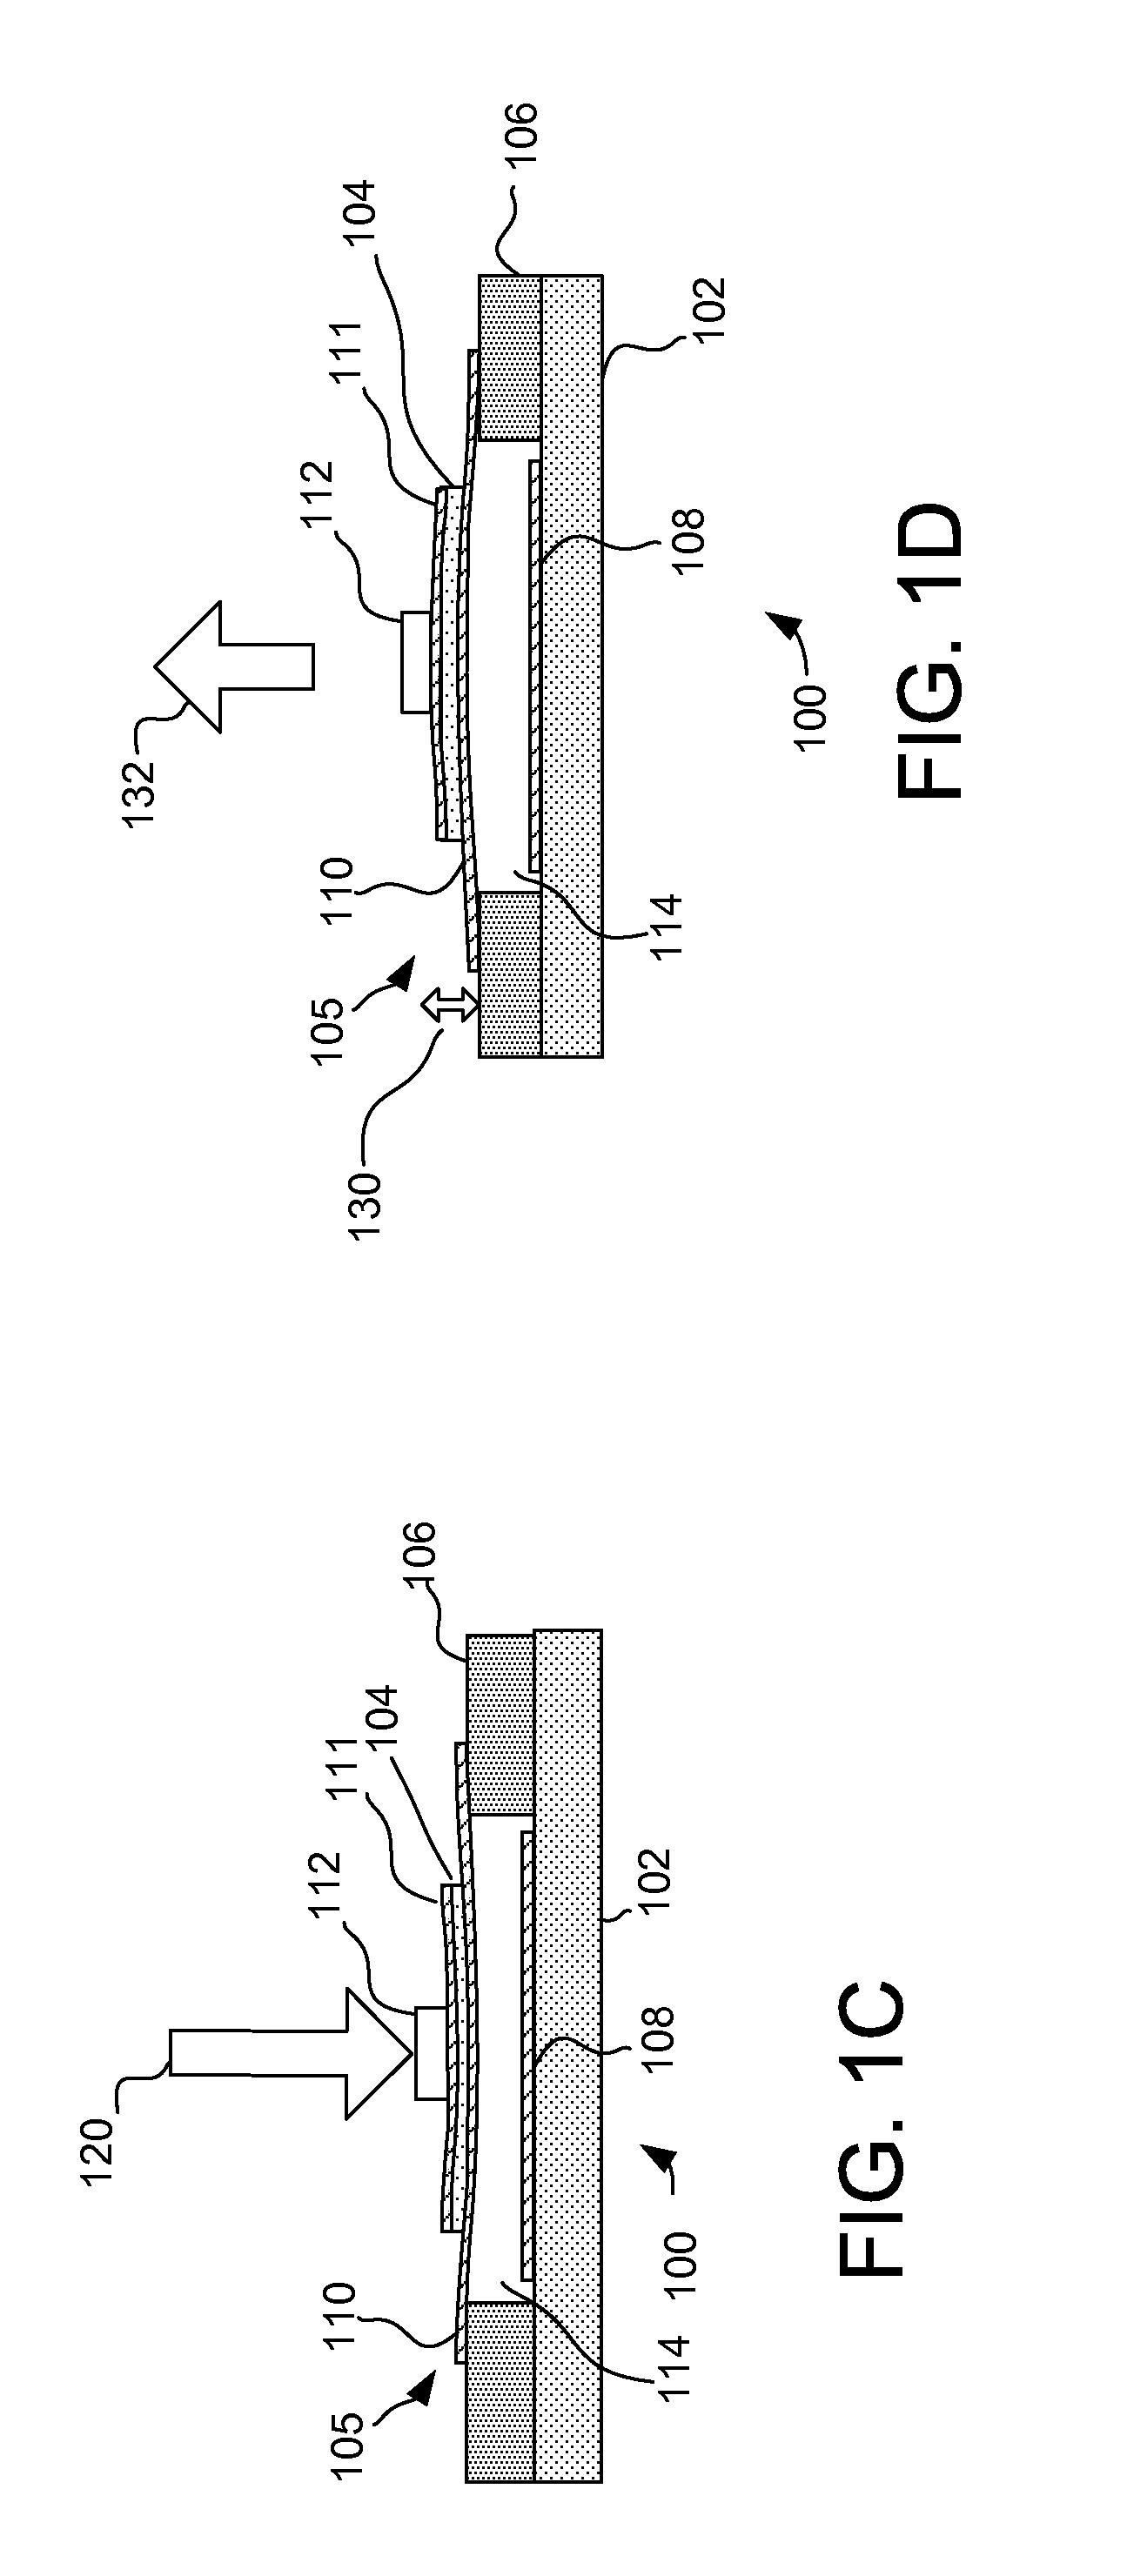 Input device with force sensing and haptic response